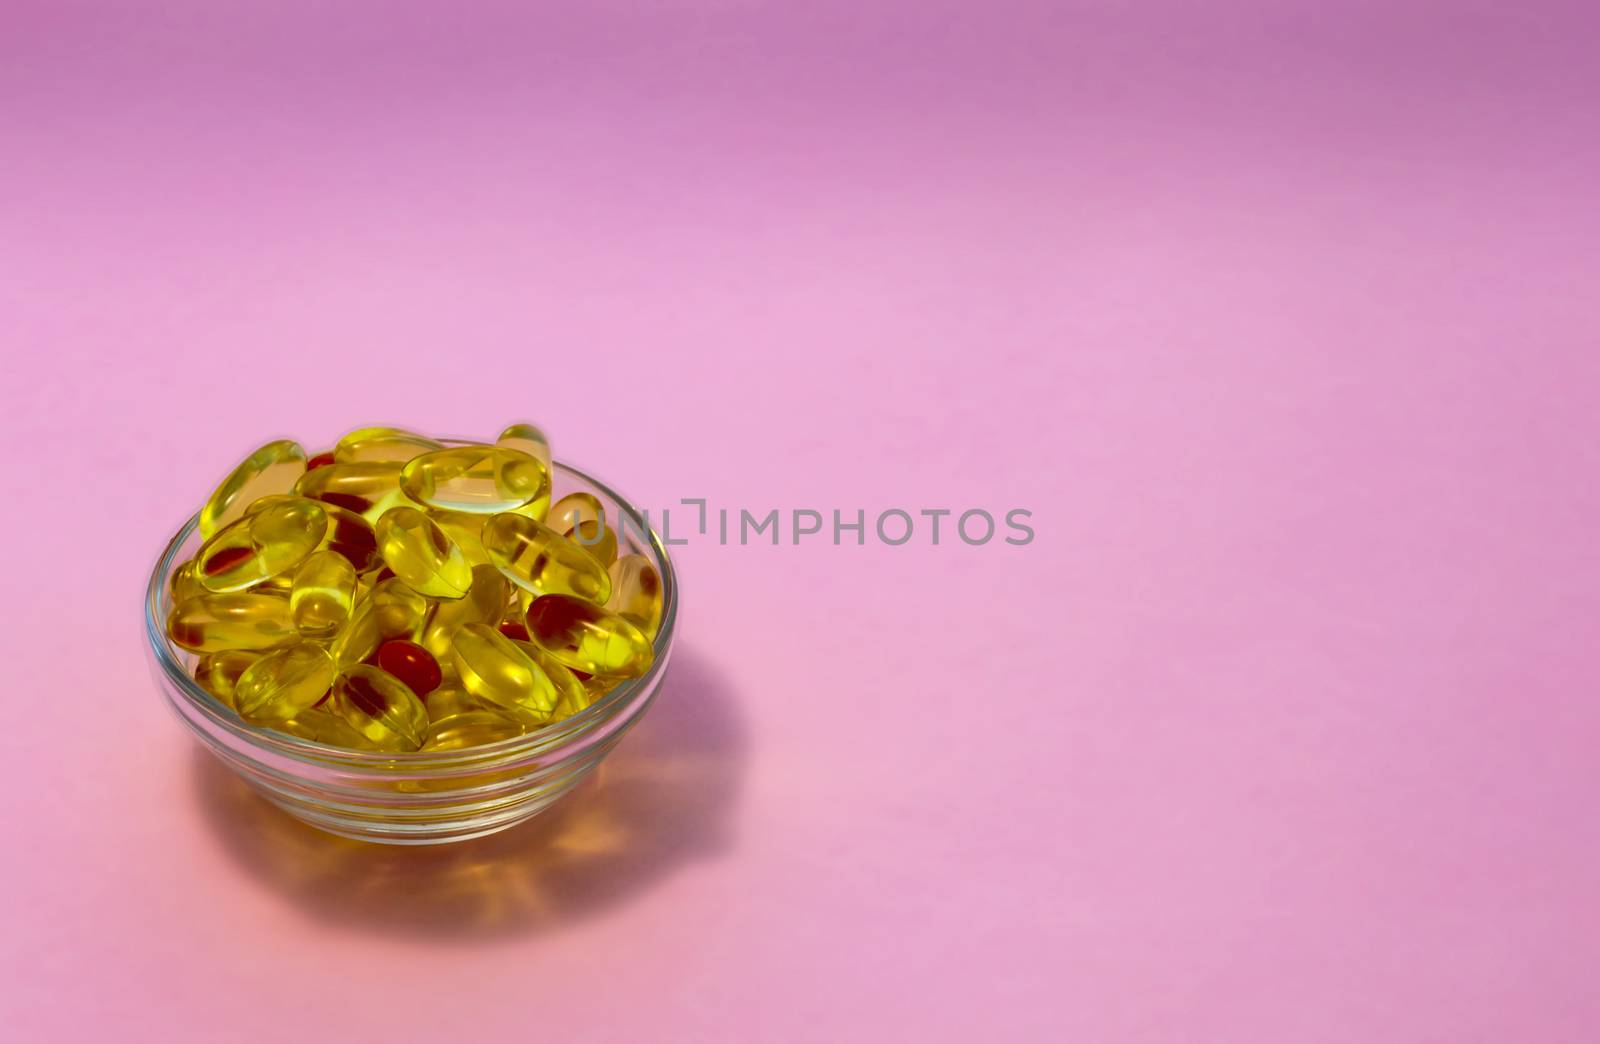 Medicine pills, tablets. pharmaceutical, supplements, fish oil, by Anelik